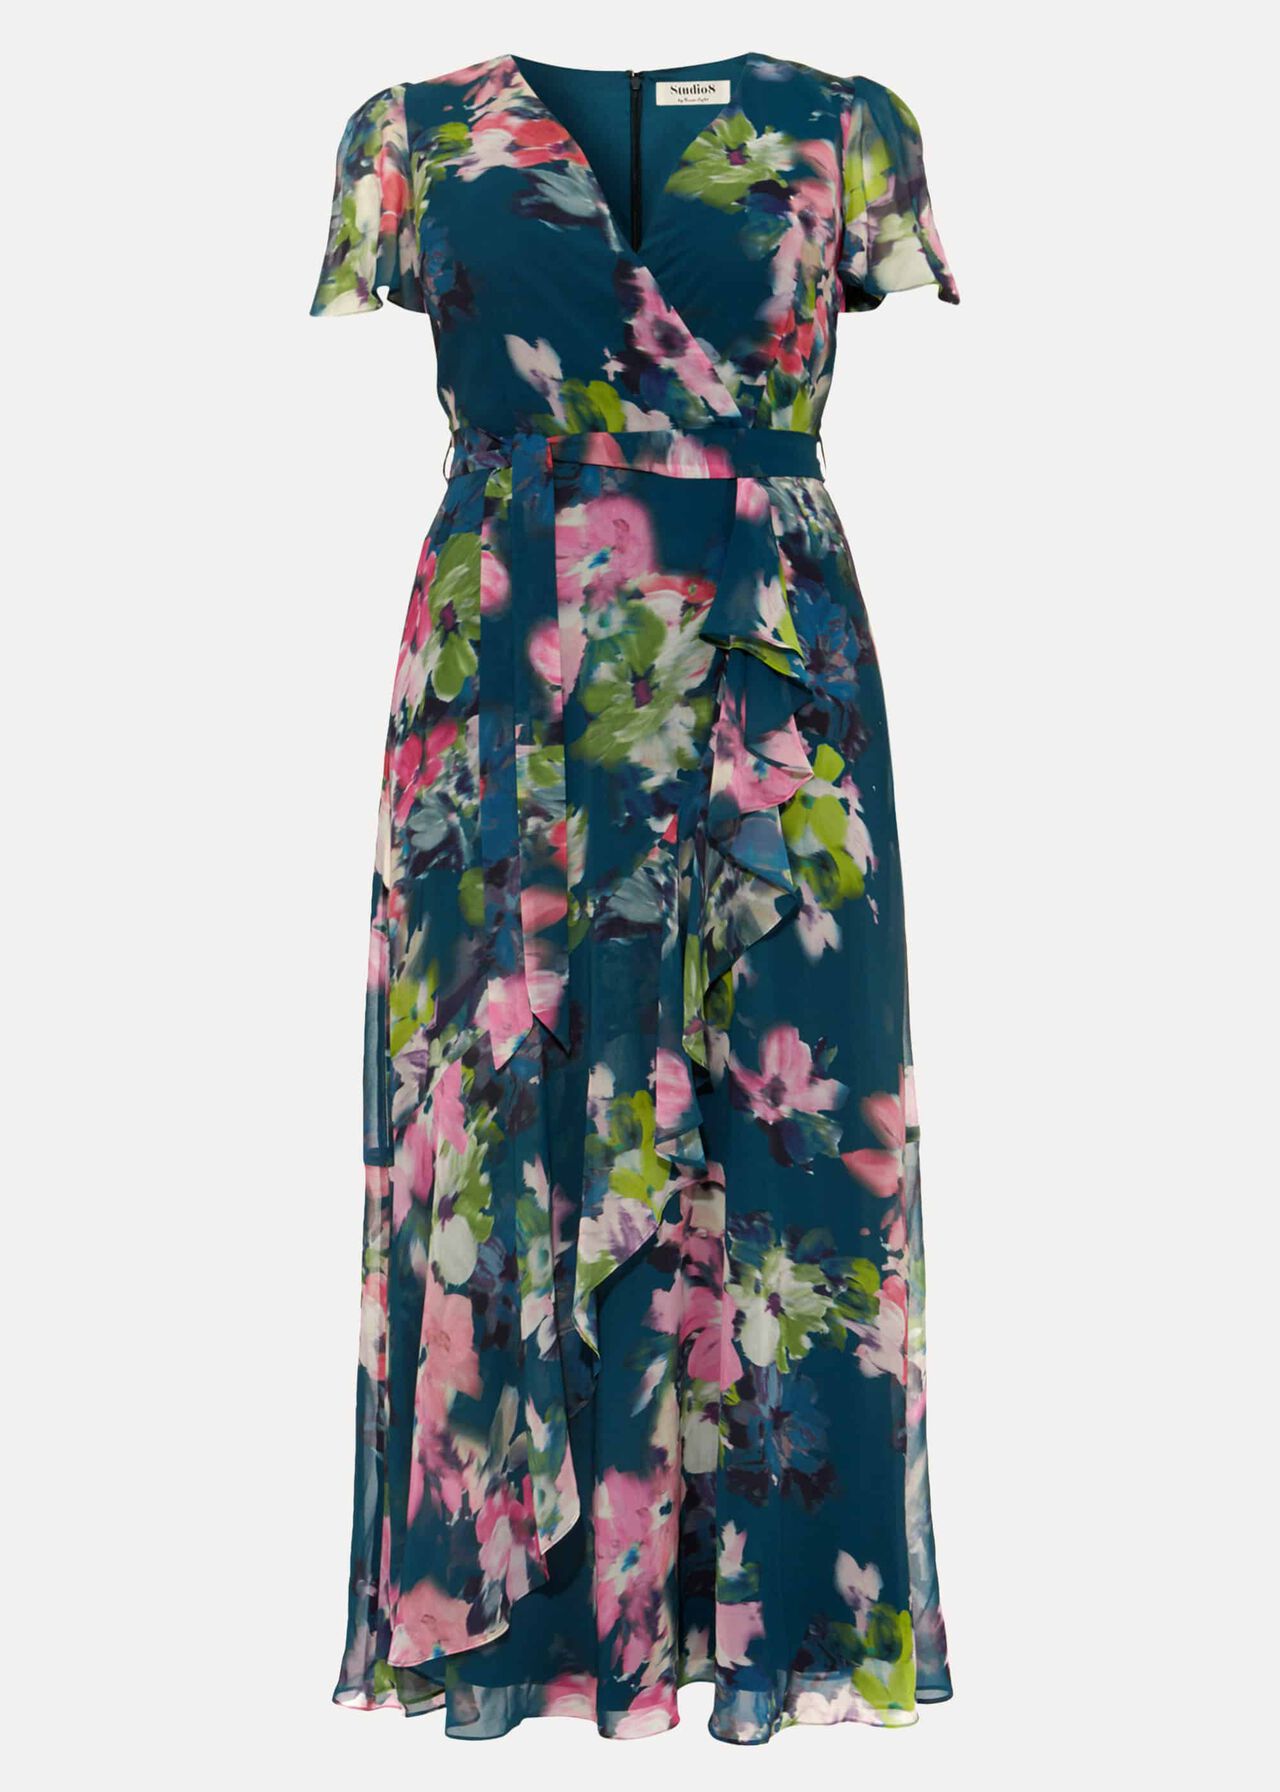 Cailyn Floral Maxi Dress